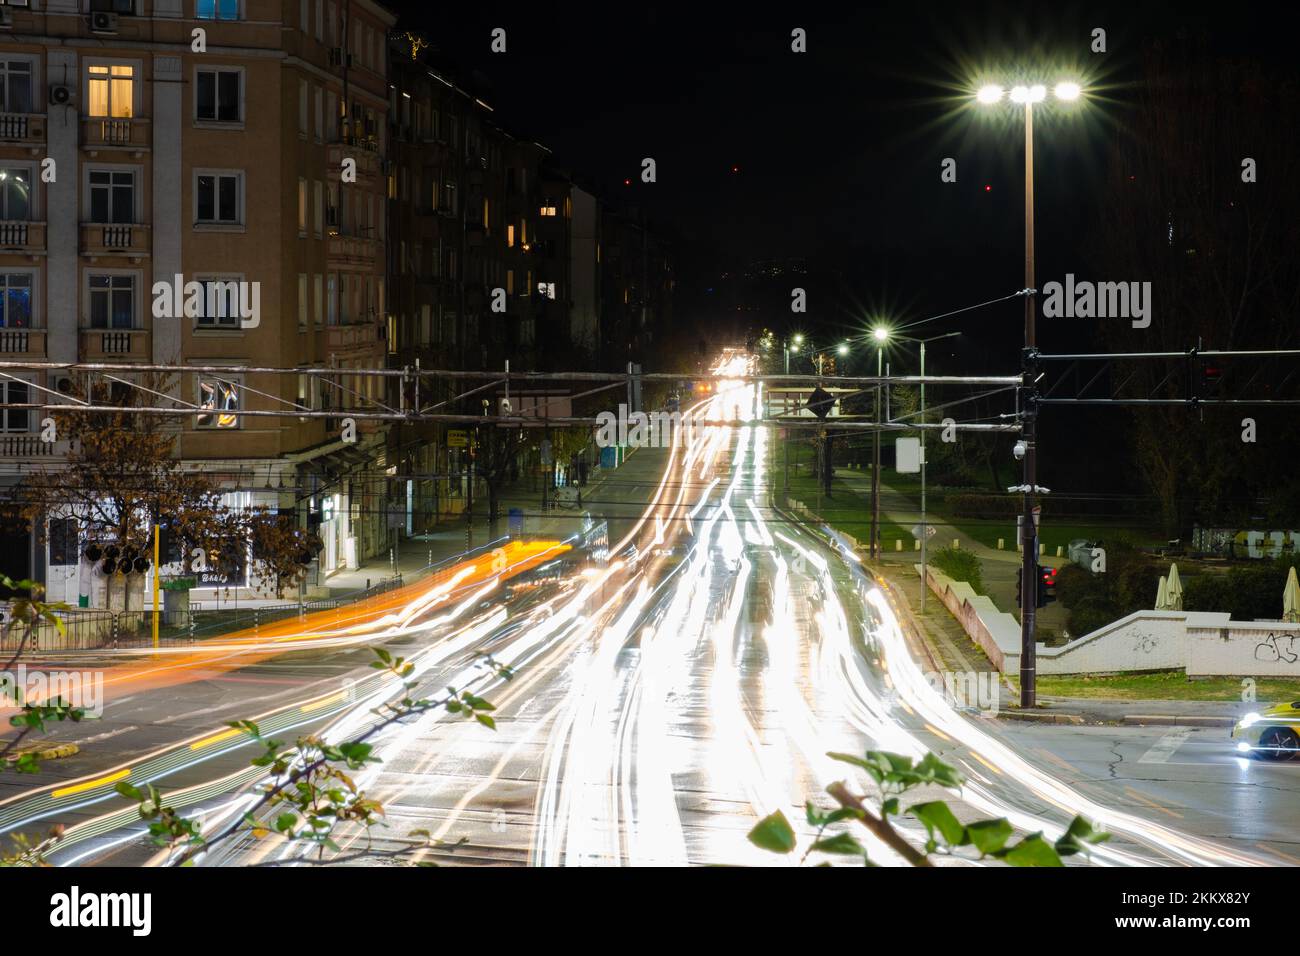 Night scene of tram in traffic at crossing with lighttrail Stock Photo